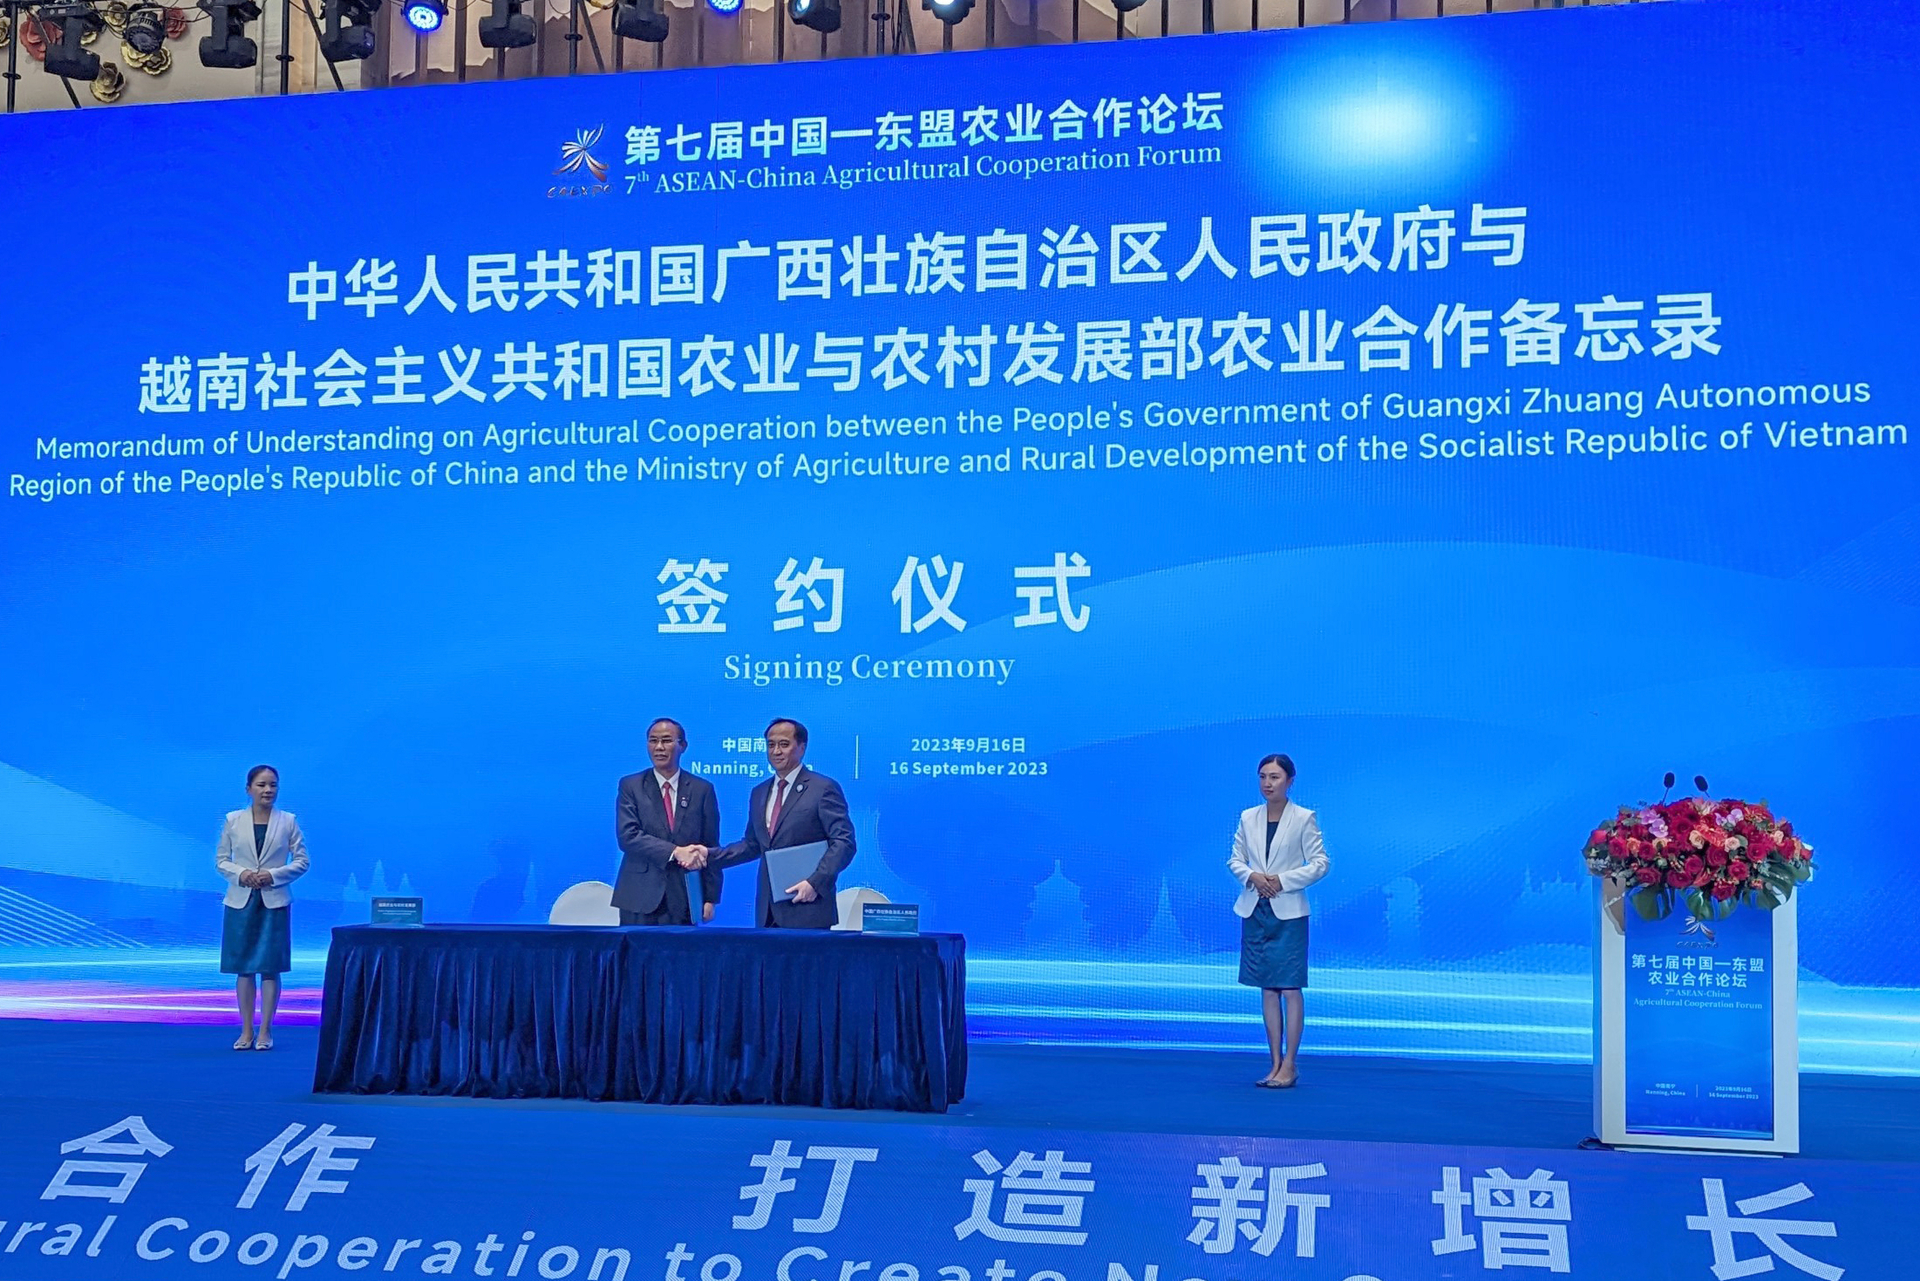 Deputy Minister of Agriculture and Rural Development Phung Duc Tien and Mr. Xu Xianhui, a representative of the Government of the Guangxi Zhuang Autonomous Region signed a Memorandum of Cooperation on agriculture. Photo: Huy Toan.